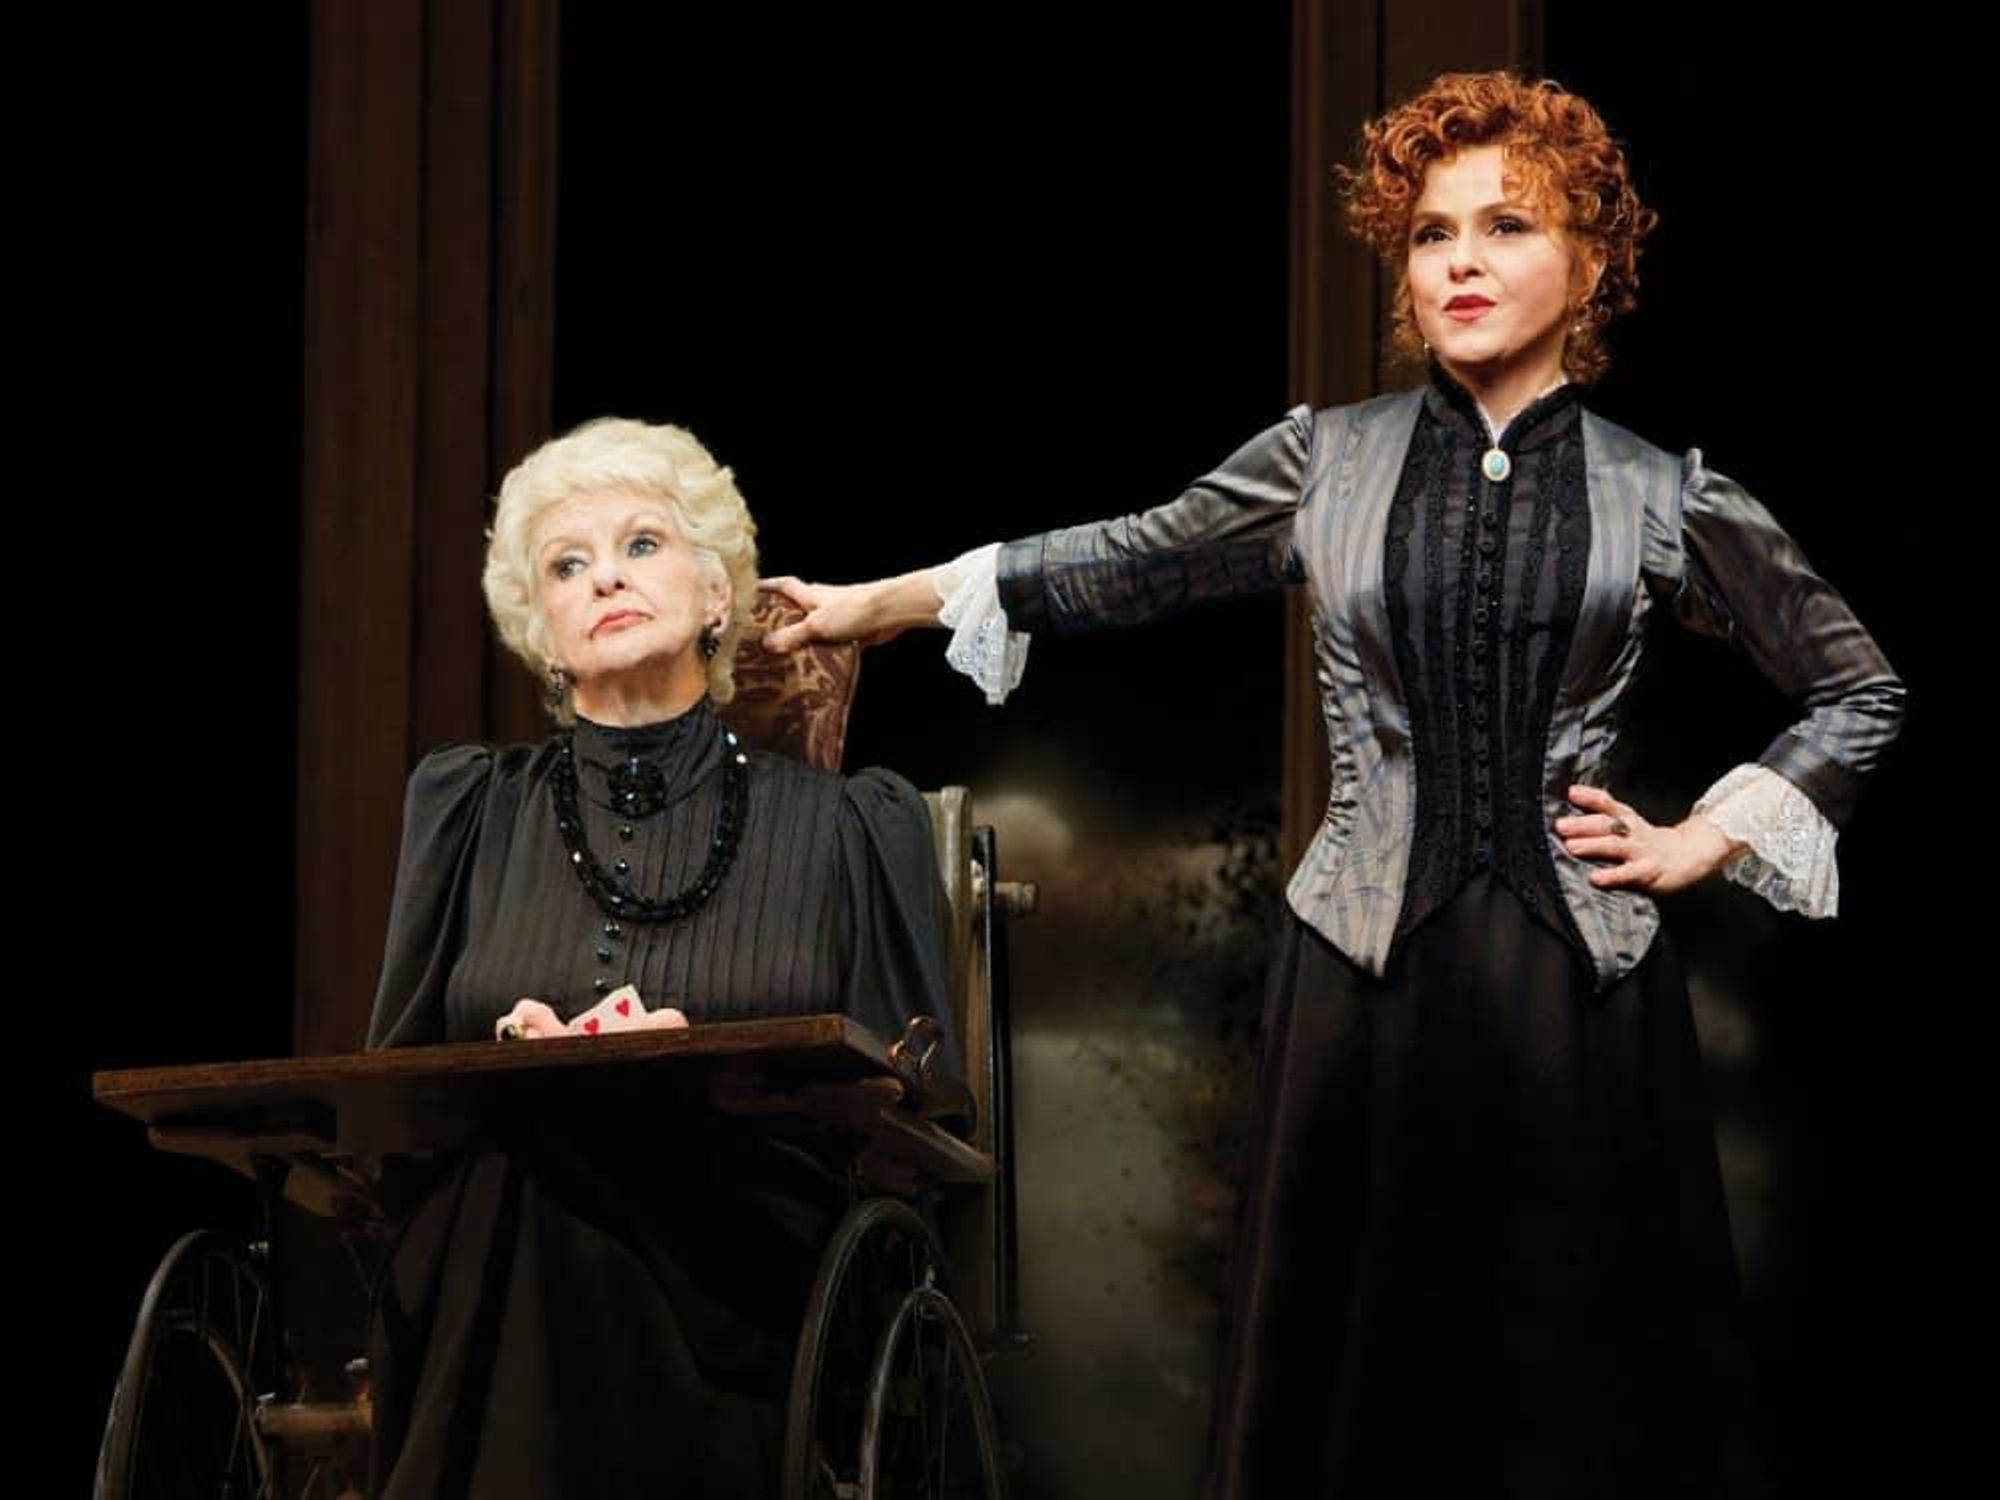 Elaine Stritch and Bernadette Peters in A Little Night Music